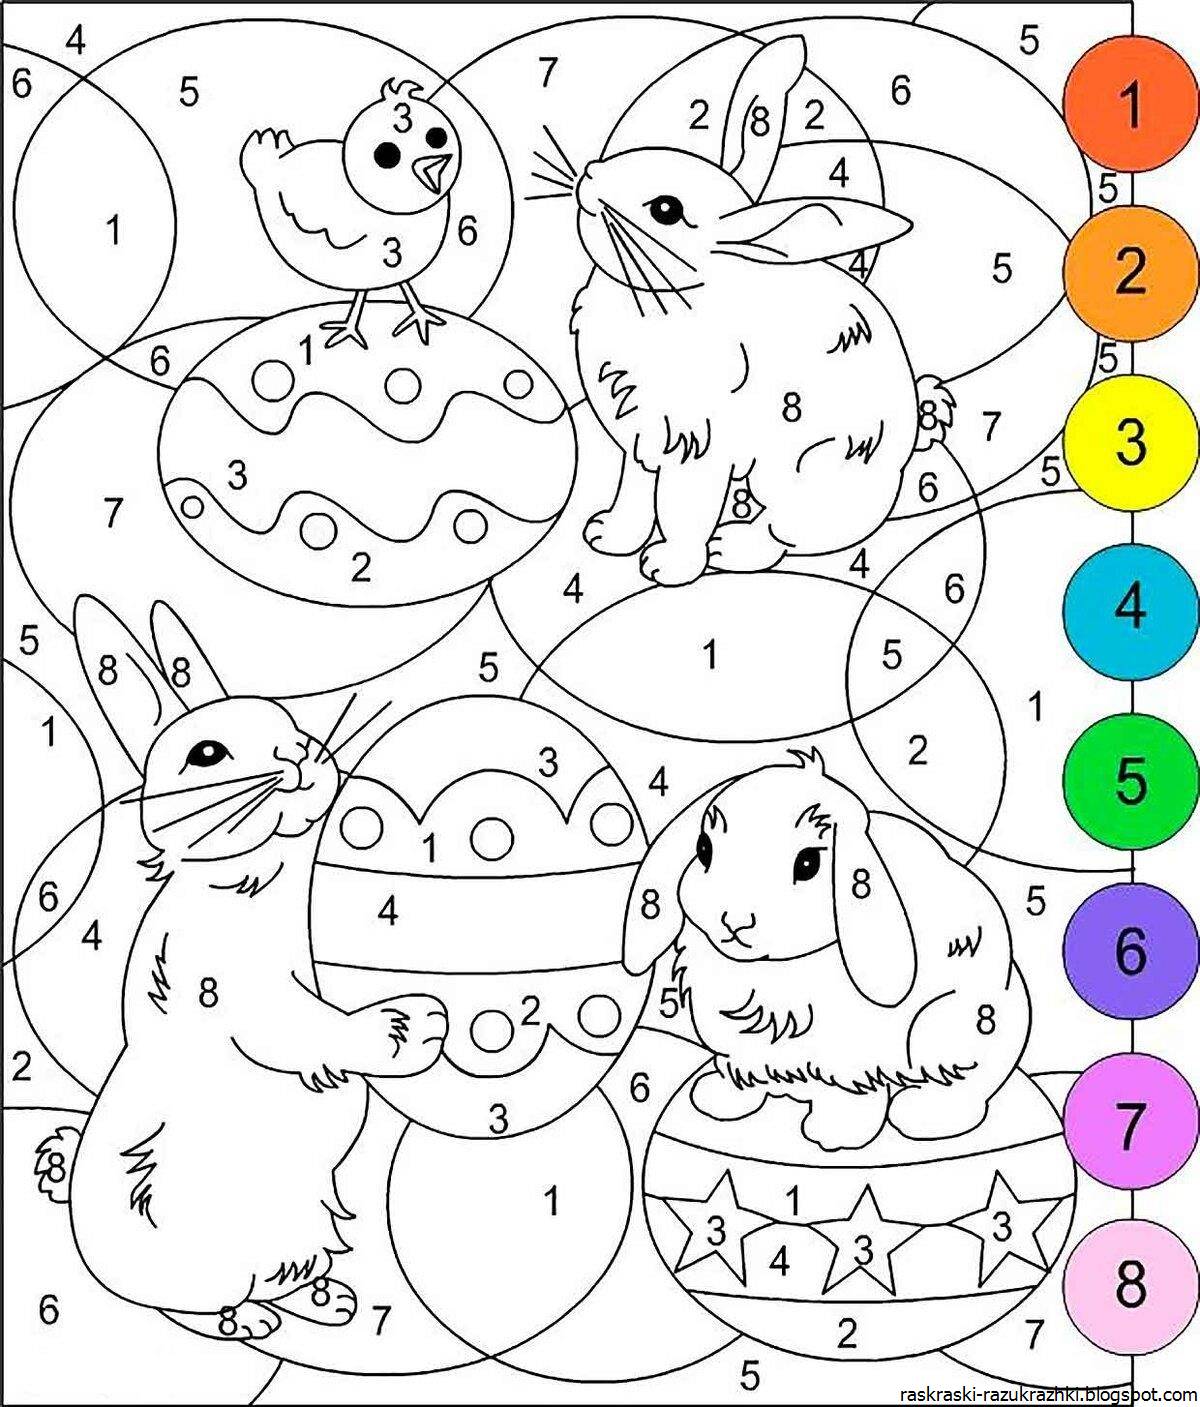 Fun coloring by numbers for kids 6-7 years old